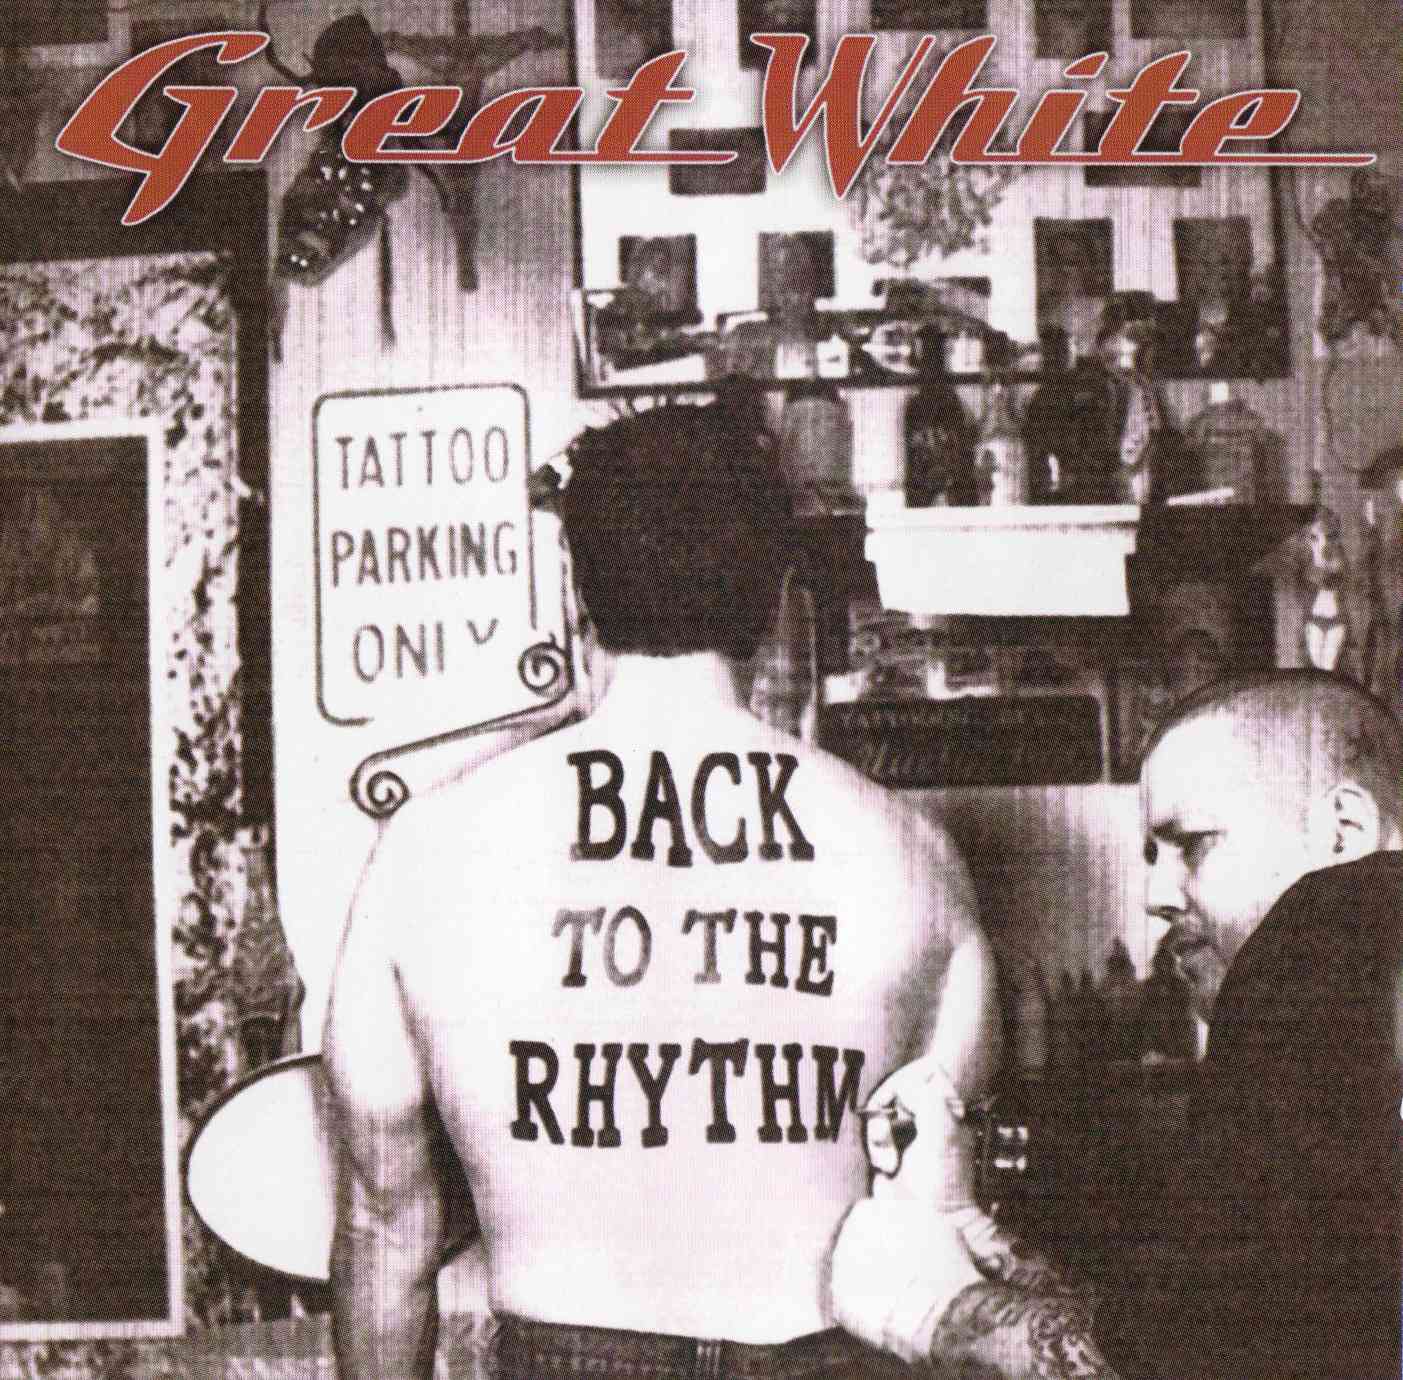 [Great+White+-+Back+To+The+Rhythm+Front.jpg]